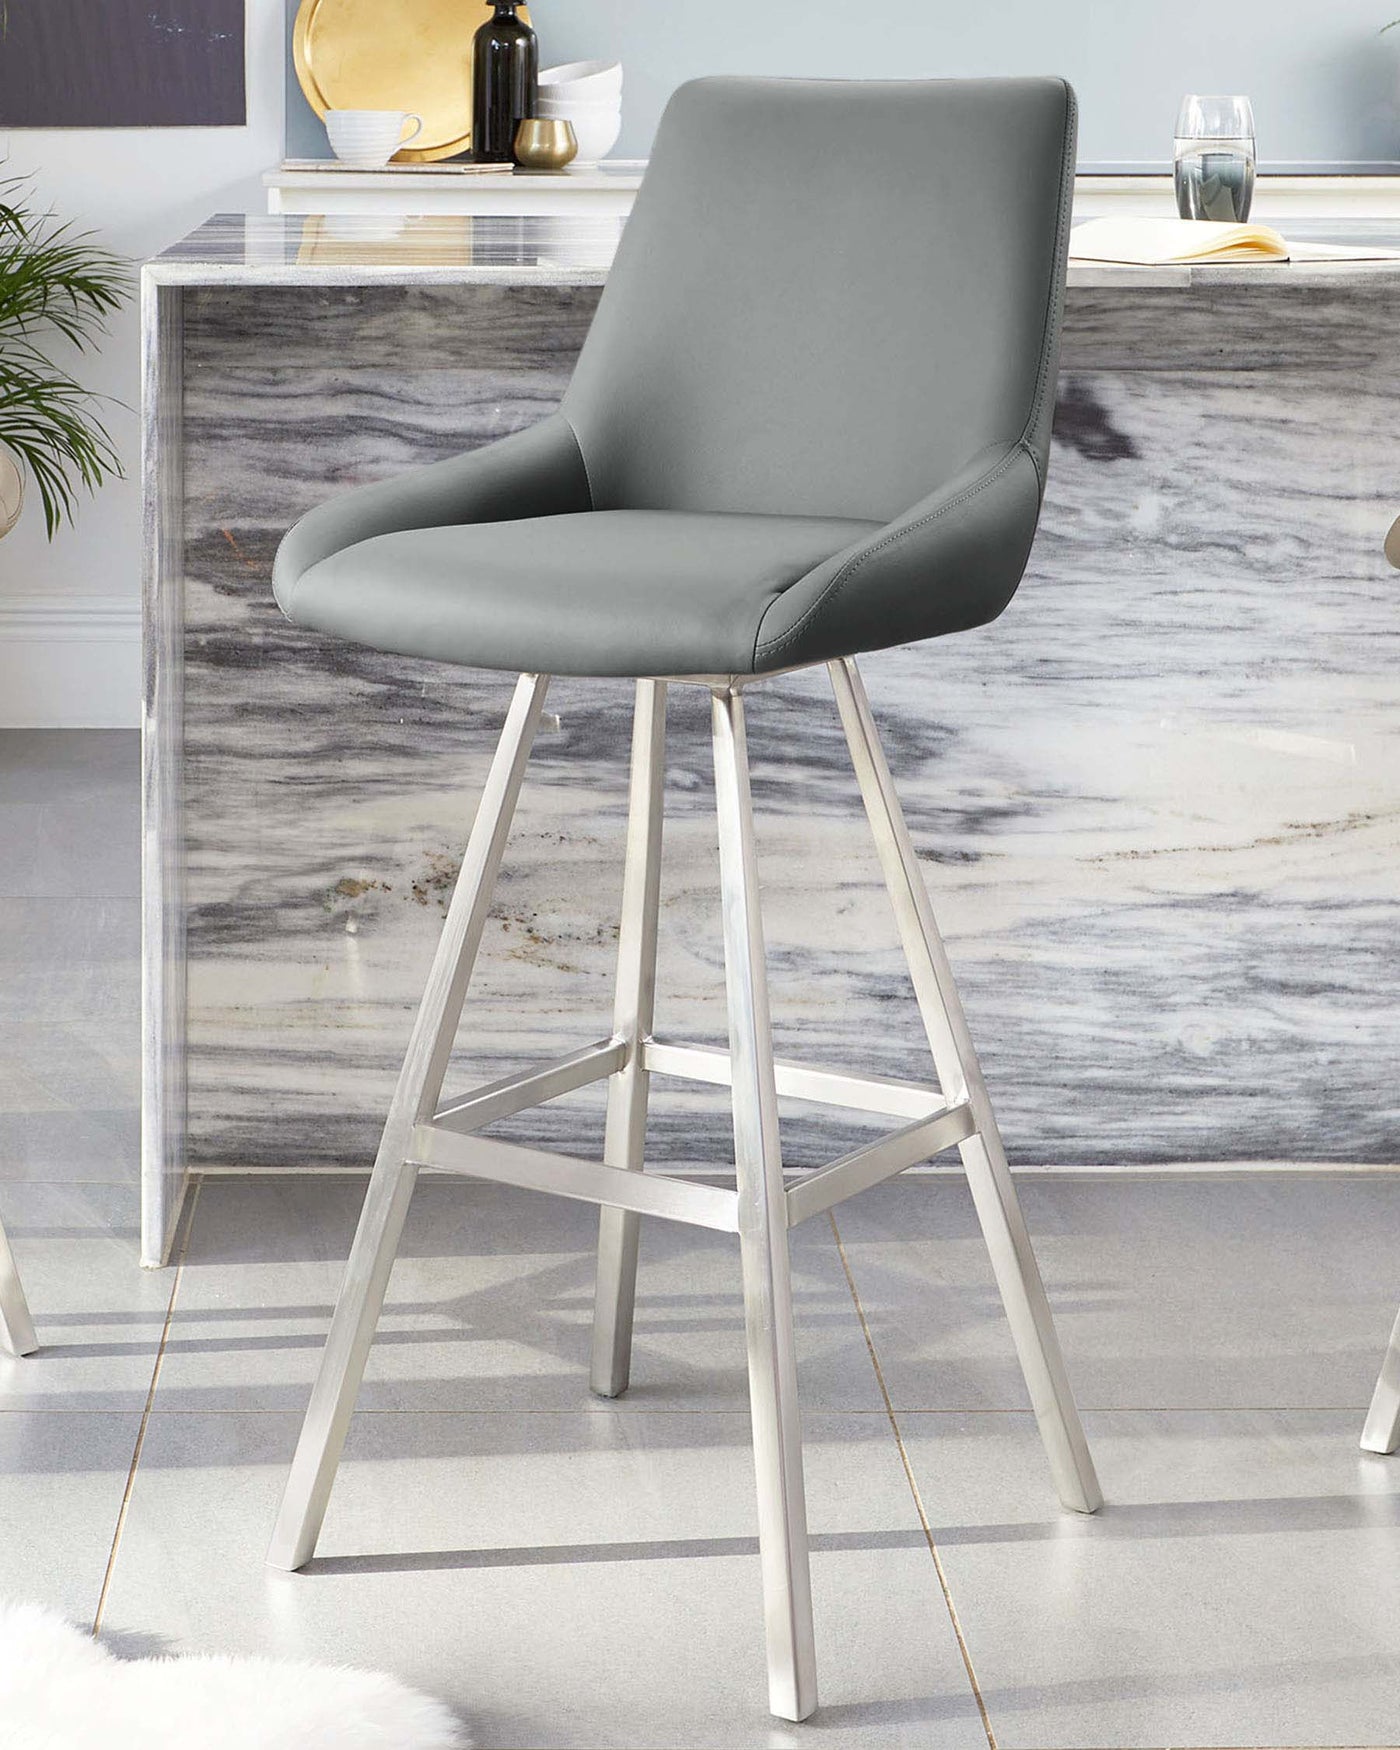 Modern grey upholstered bar stool with a curved backrest and sleek silver metal legs, set against a marble counter backdrop.